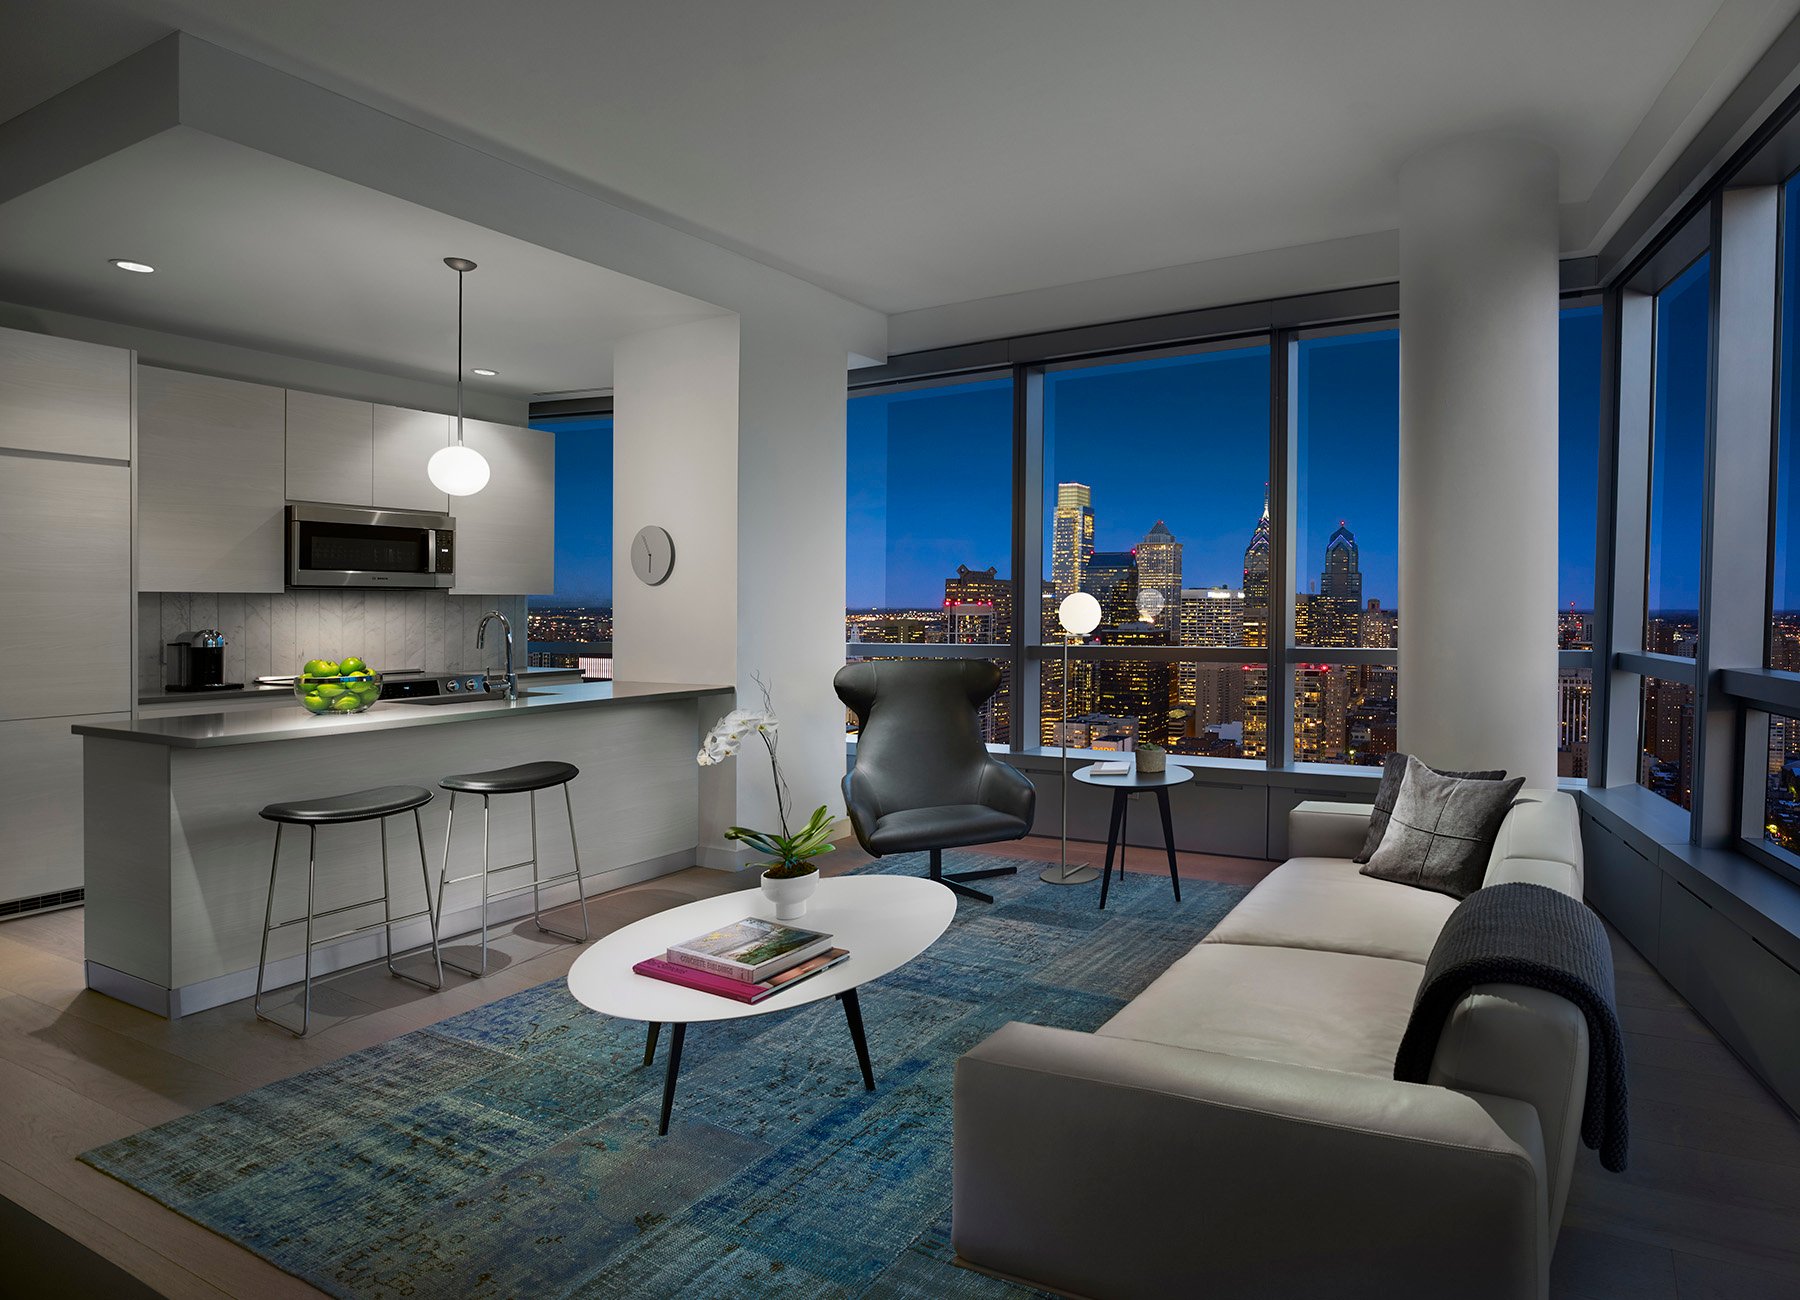 AKA University City living room with open kitchen and full-length window view of Philadelphia skyline at night 